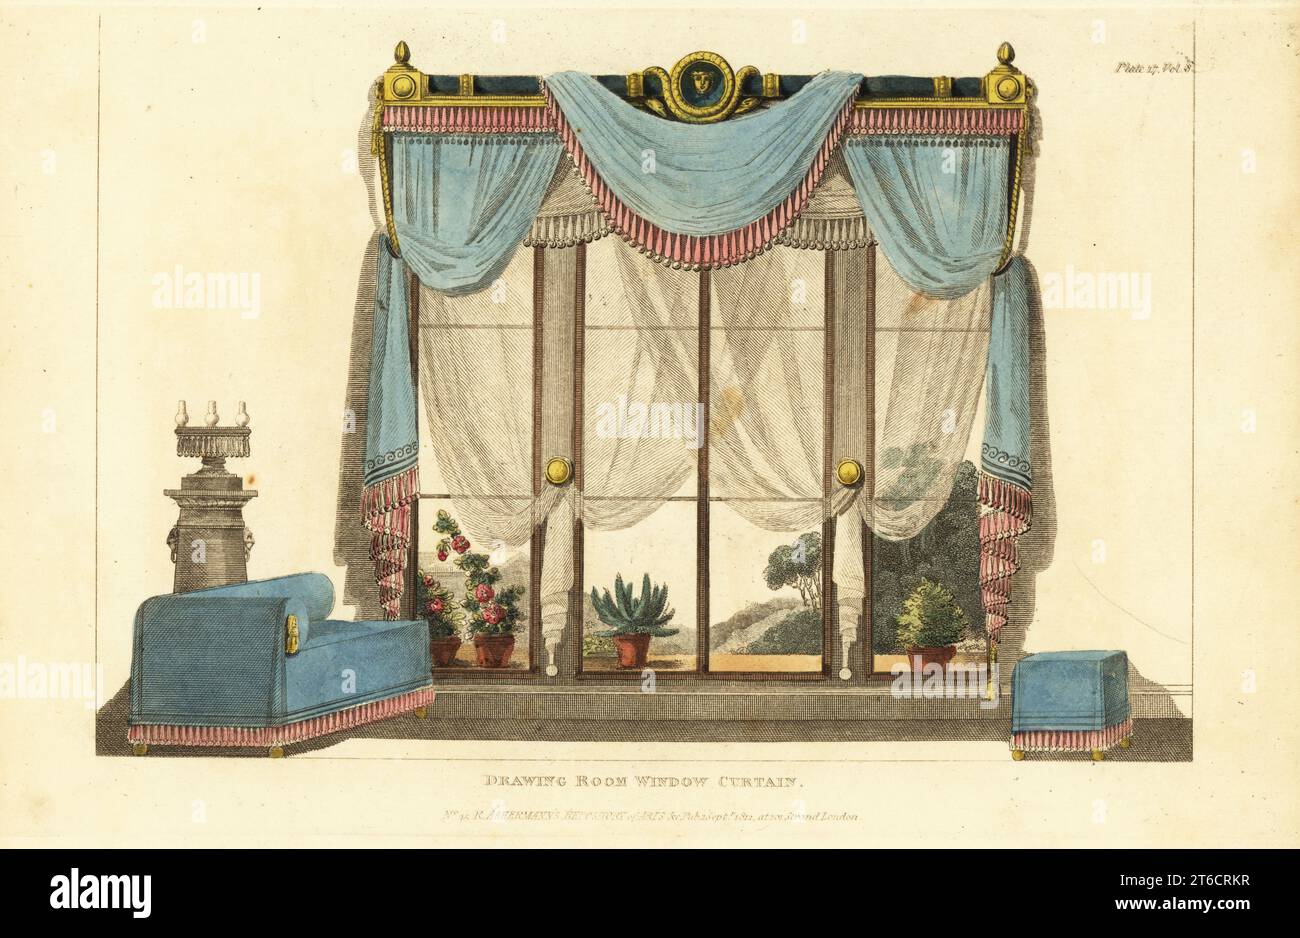 Drawing room window curtain, cornices, ornamented with French fringe and muslin curtains under blue damask. Grecian sofa and stool, patent pedestal lamp. Handcoloured copperplate engraving from The Upholsterer's and Cabinet-Maker's Repository consisting of seventy-six designs of modern and fashionable furniture, Rudolph Ackermann, London, 1830. Stock Photo